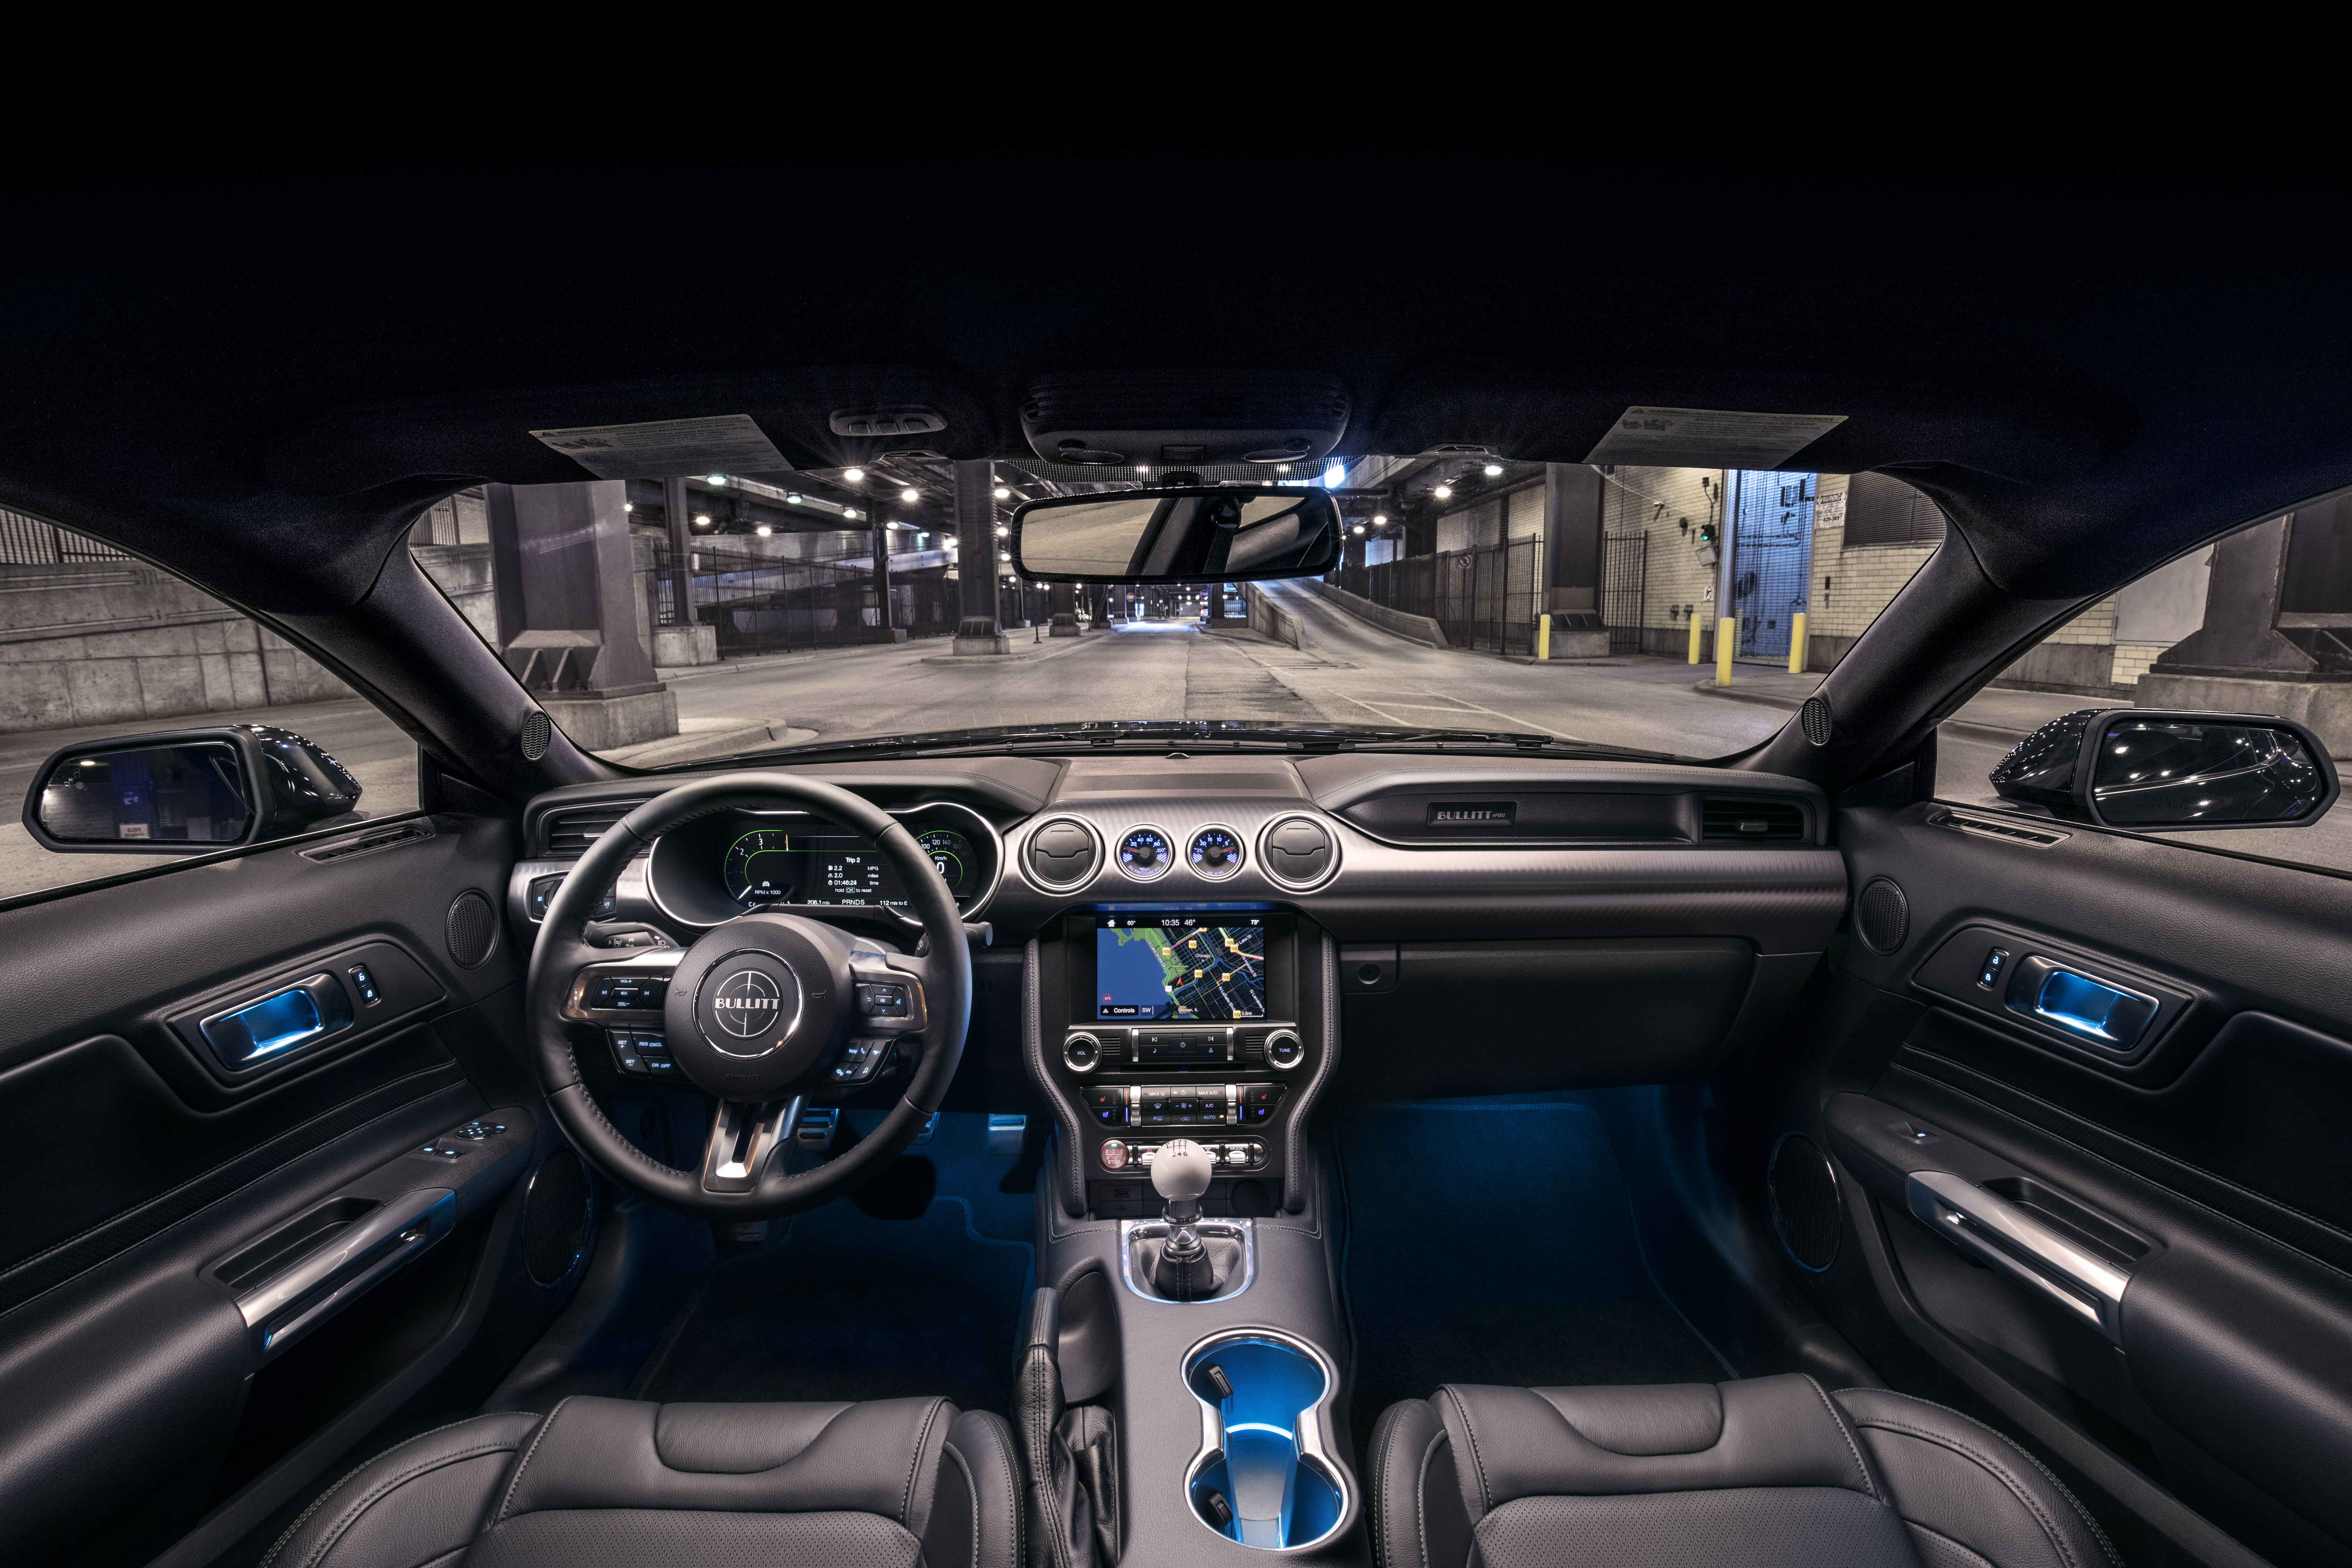 In addition to the well-appointed interior that mixes the old and the new, the Bullitt has adjustable LED lighting to fit your driving mood. | Ford Motor Company photo